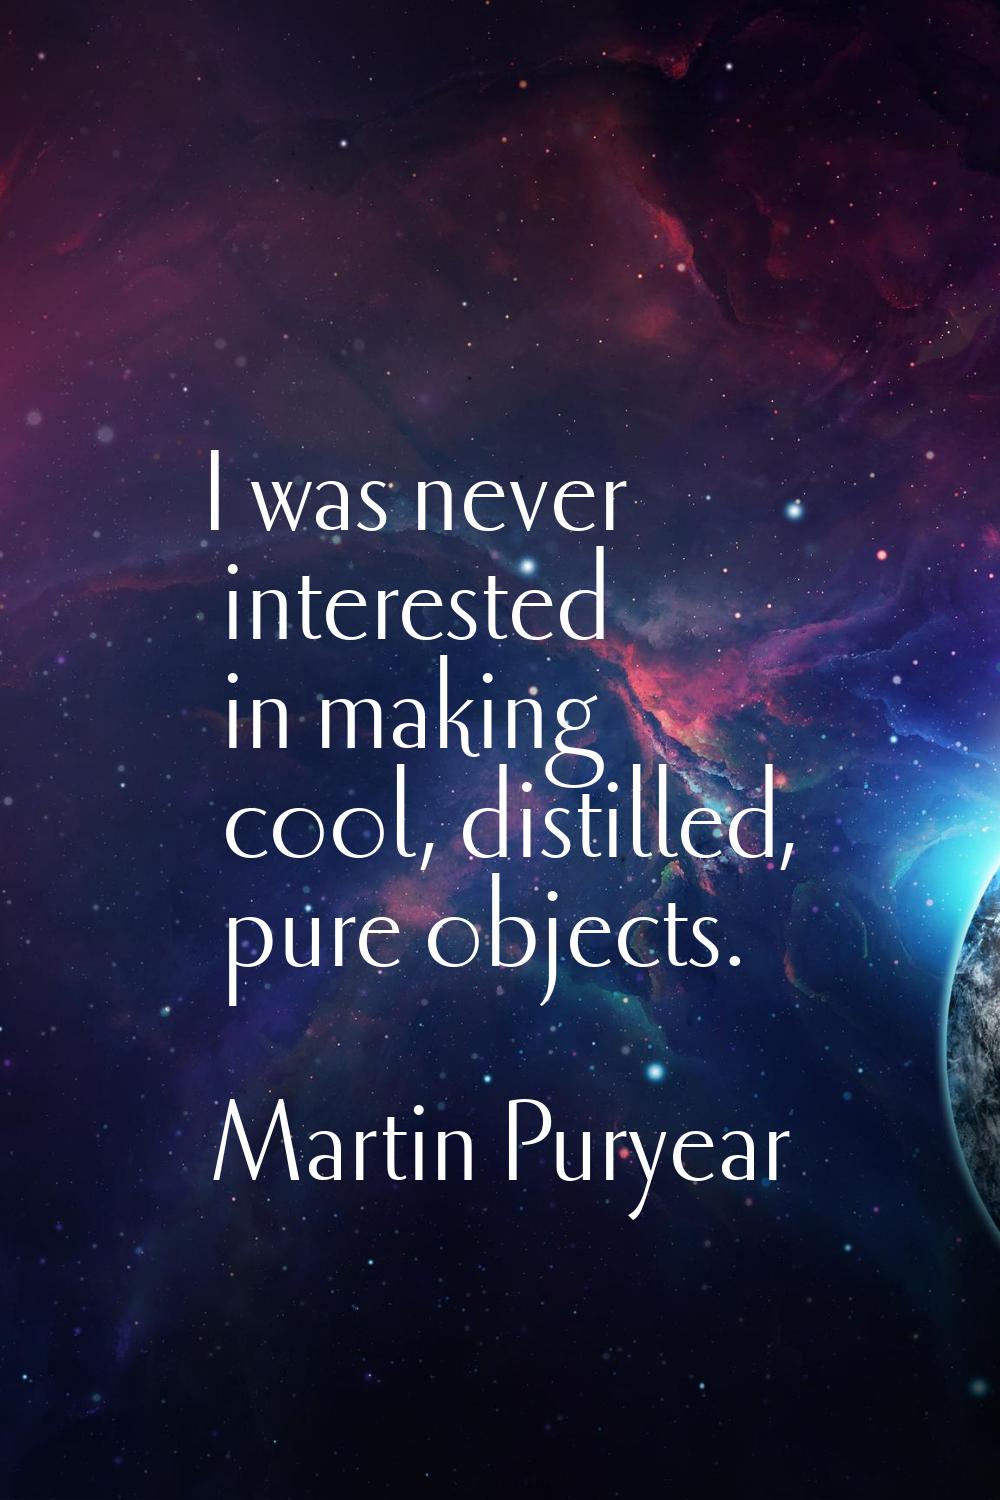 I was never interested in making cool, distilled, pure objects.